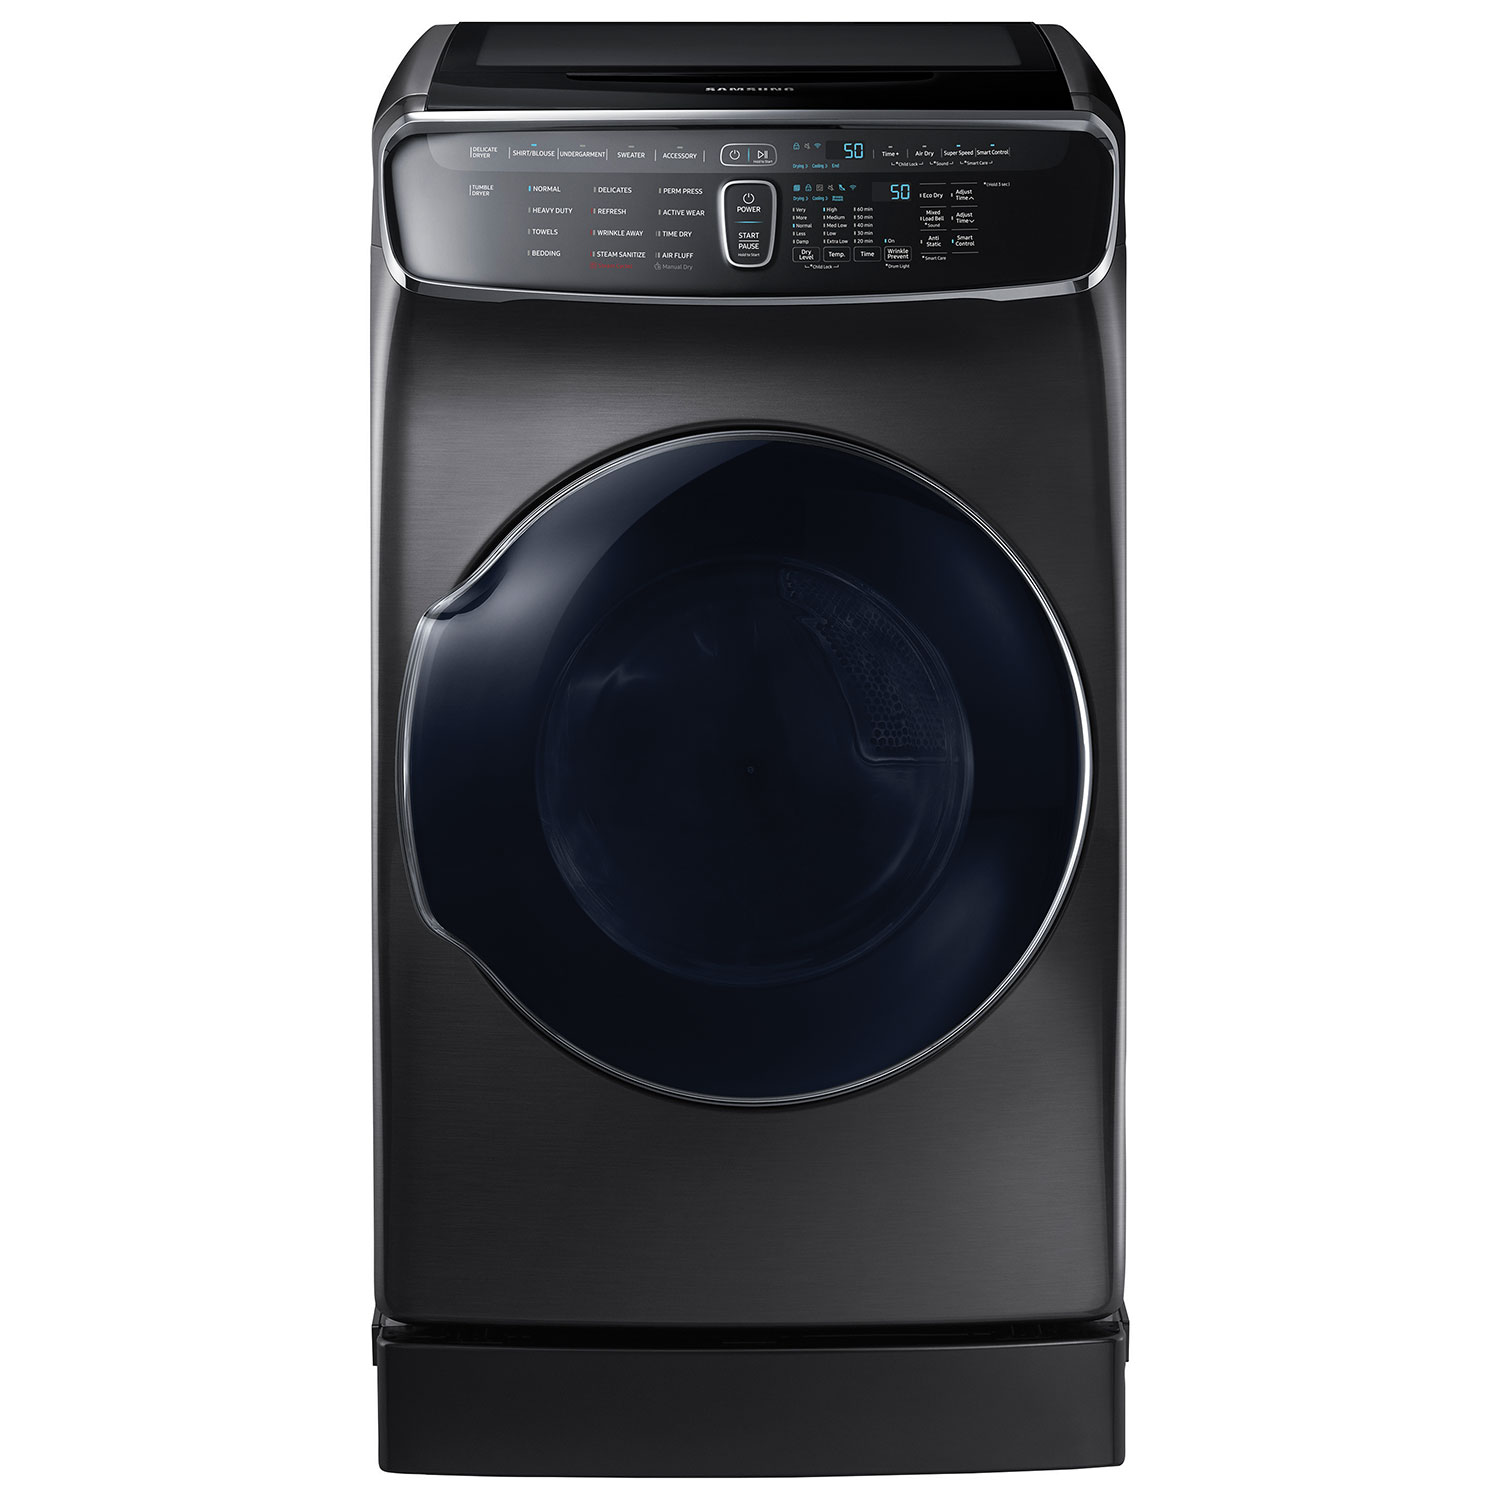 Samsung 7.5 Cu. Ft. Electric Steam Dryer with Flex Dry Compartment (DVE60M9900V) - Black Stainless